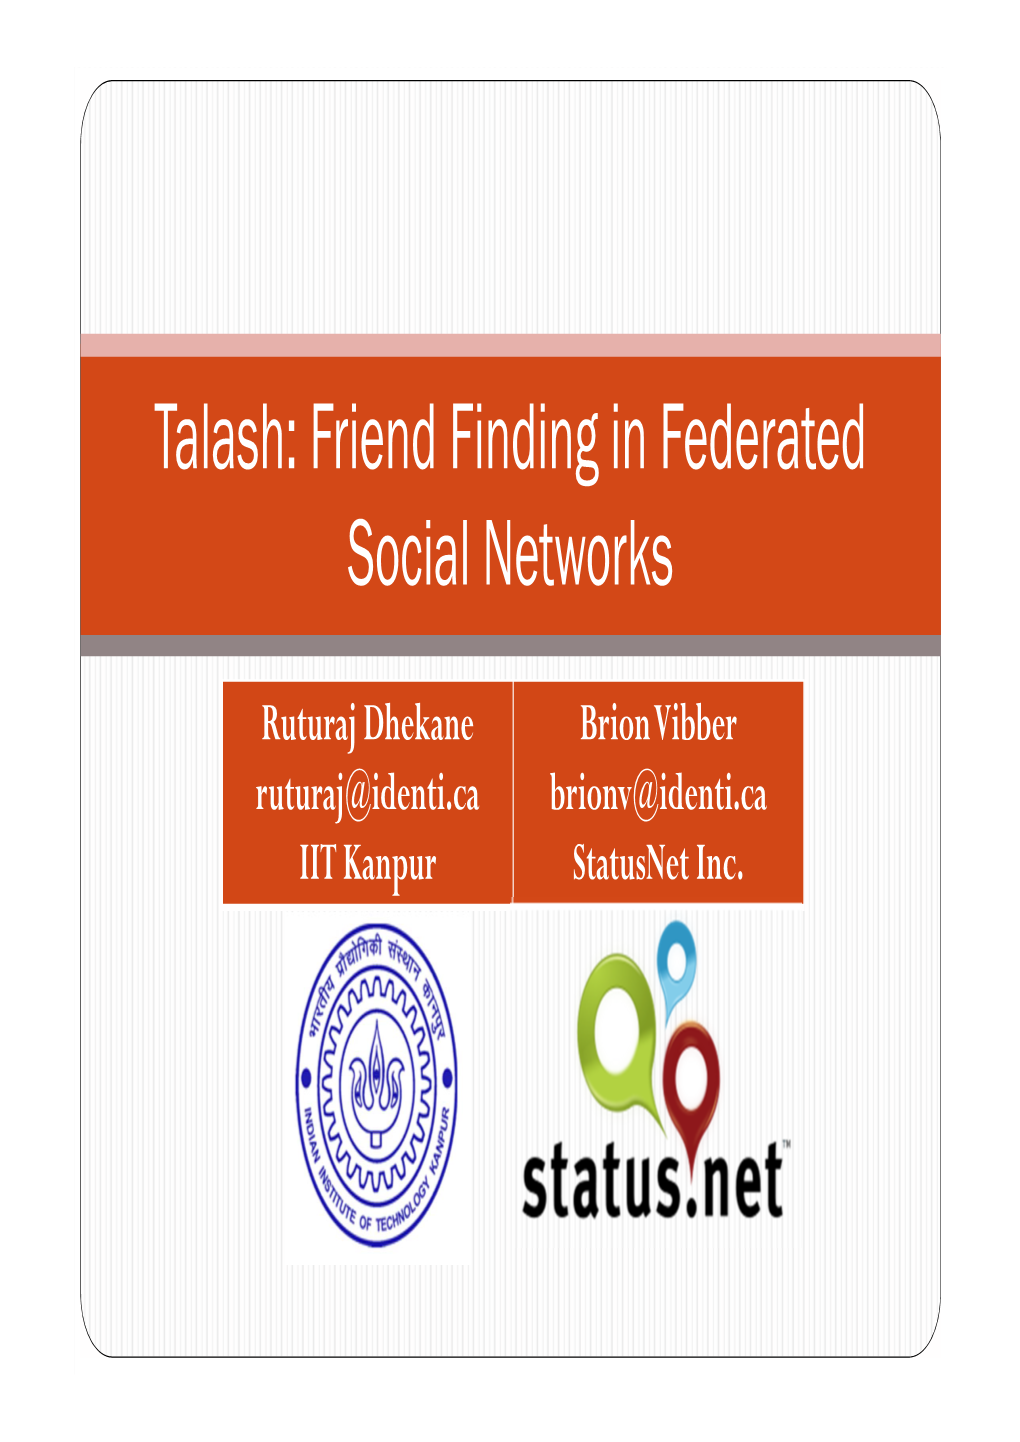 Talash: Friend Finding in Federated Social Networks